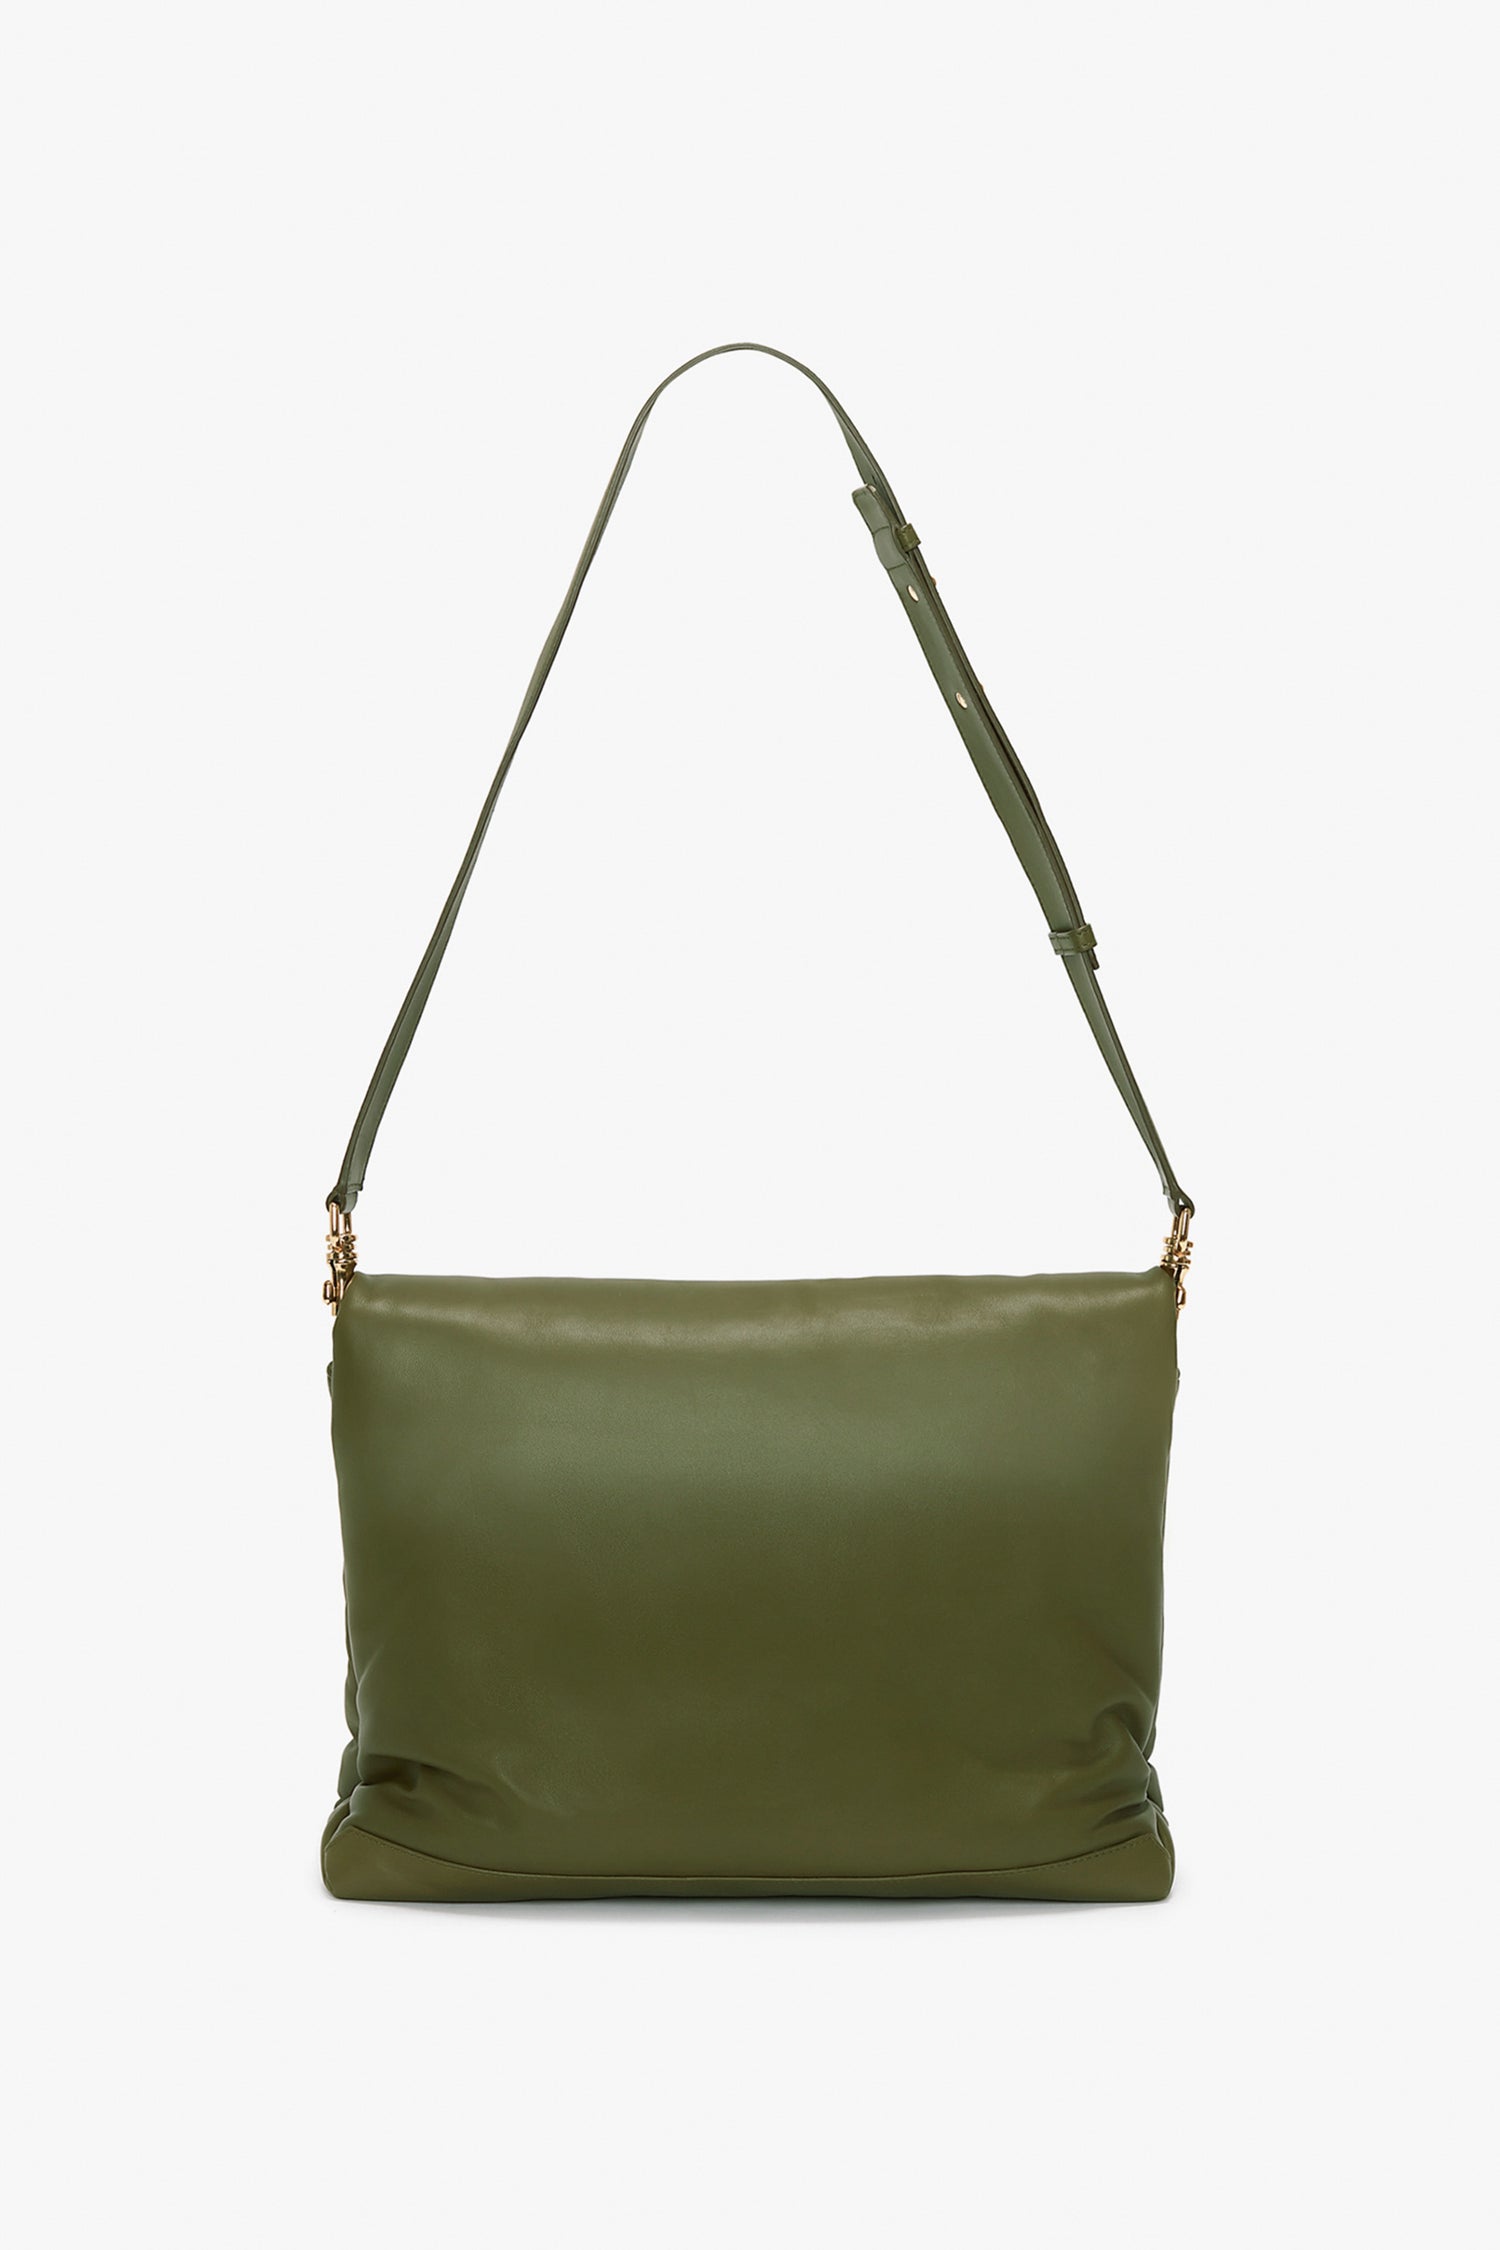 Olive green **Puffy Jumbo Chain Pouch In Khaki Leather** crafted from luxurious sheepskin nappa leather, featuring a puffy jumbo chain pouch and a long, adjustable strap with gold-tone hardware, displayed against a plain white background by **Victoria Beckham**.